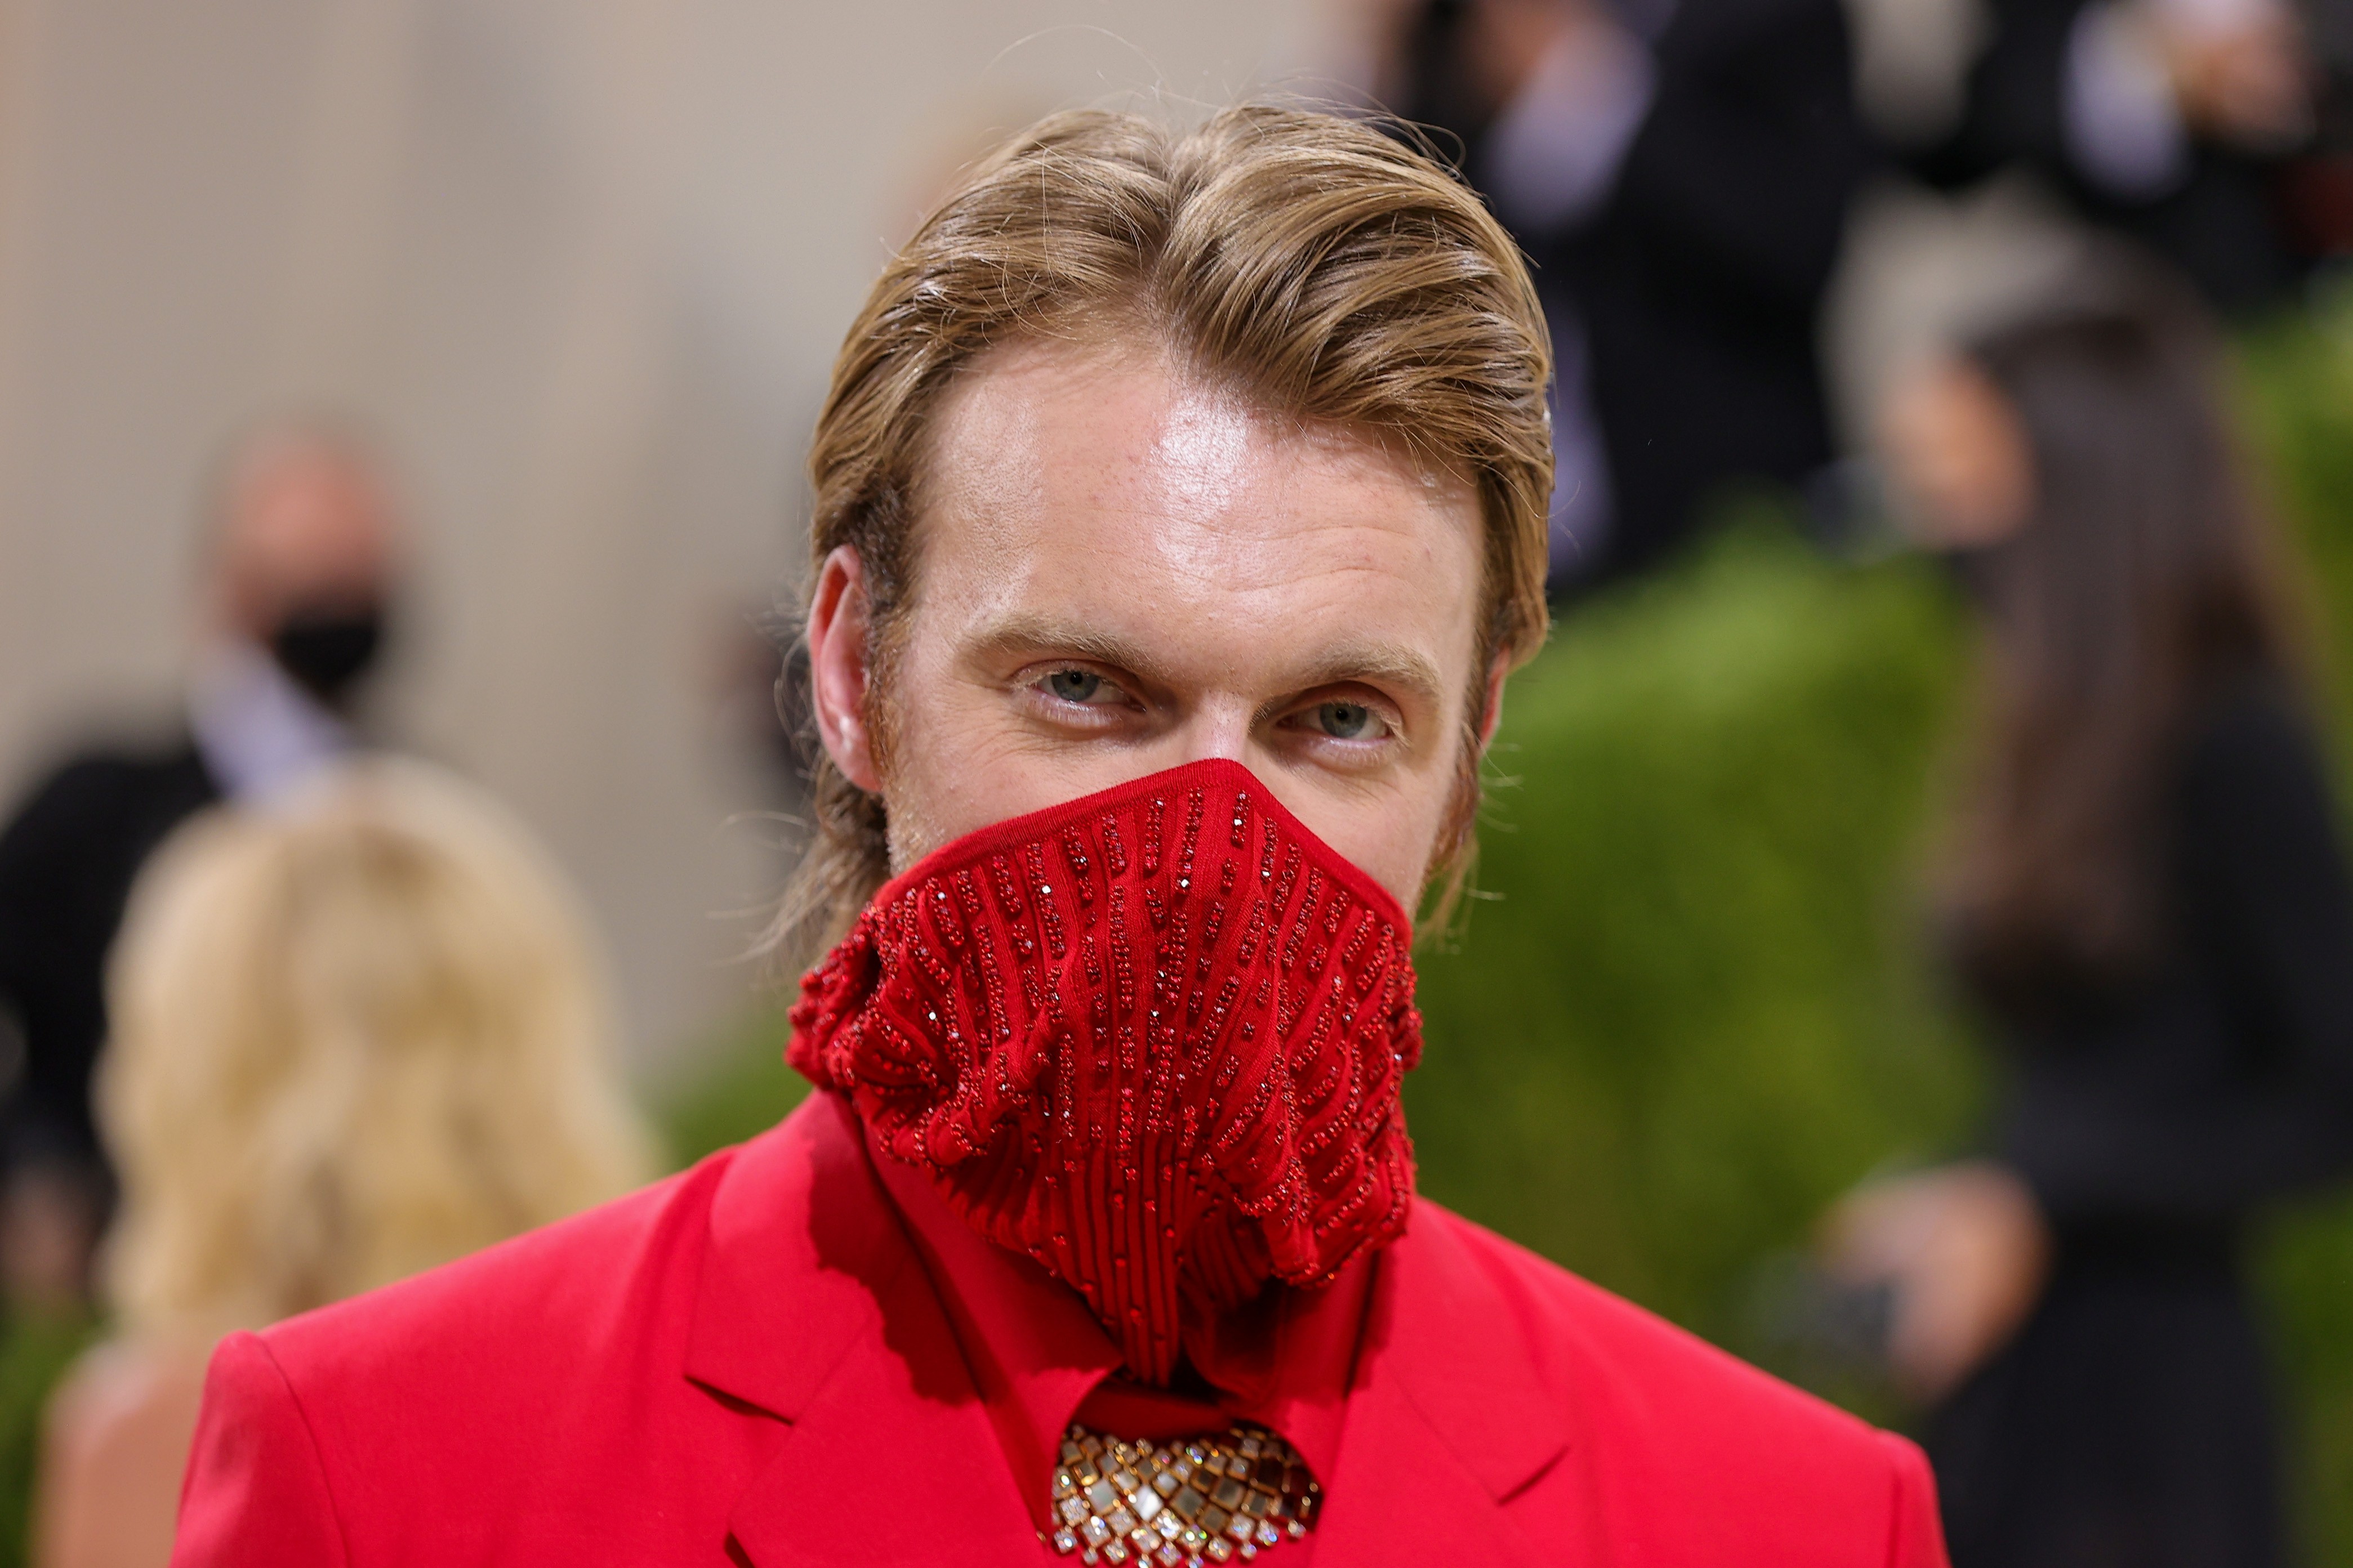 NEW YORK, NEW YORK - SEPTEMBER 13: Finneas attends The 2021 Met Gala Celebrating In America: A Lexicon Of Fashion at Metropolitan Museum of Art on September 13, 2021 in New York City. (Photo by Theo Wargo/Getty Images) (Foto: Getty Images)